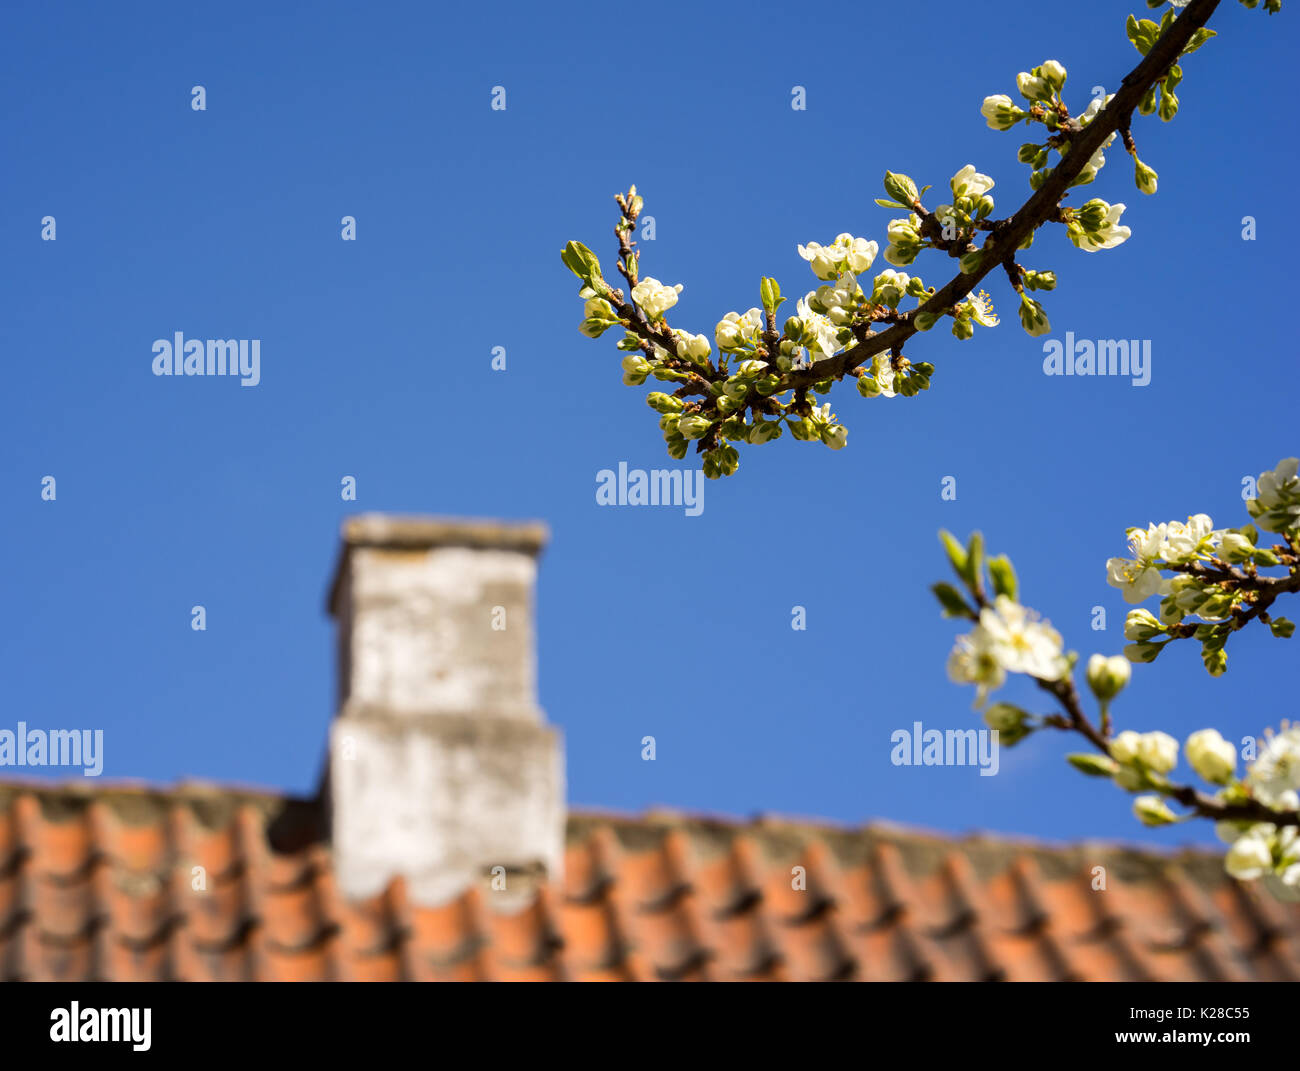 Close-up of roof and chimney against the blue sky with blushing apple trees in the foreground Stock Photo